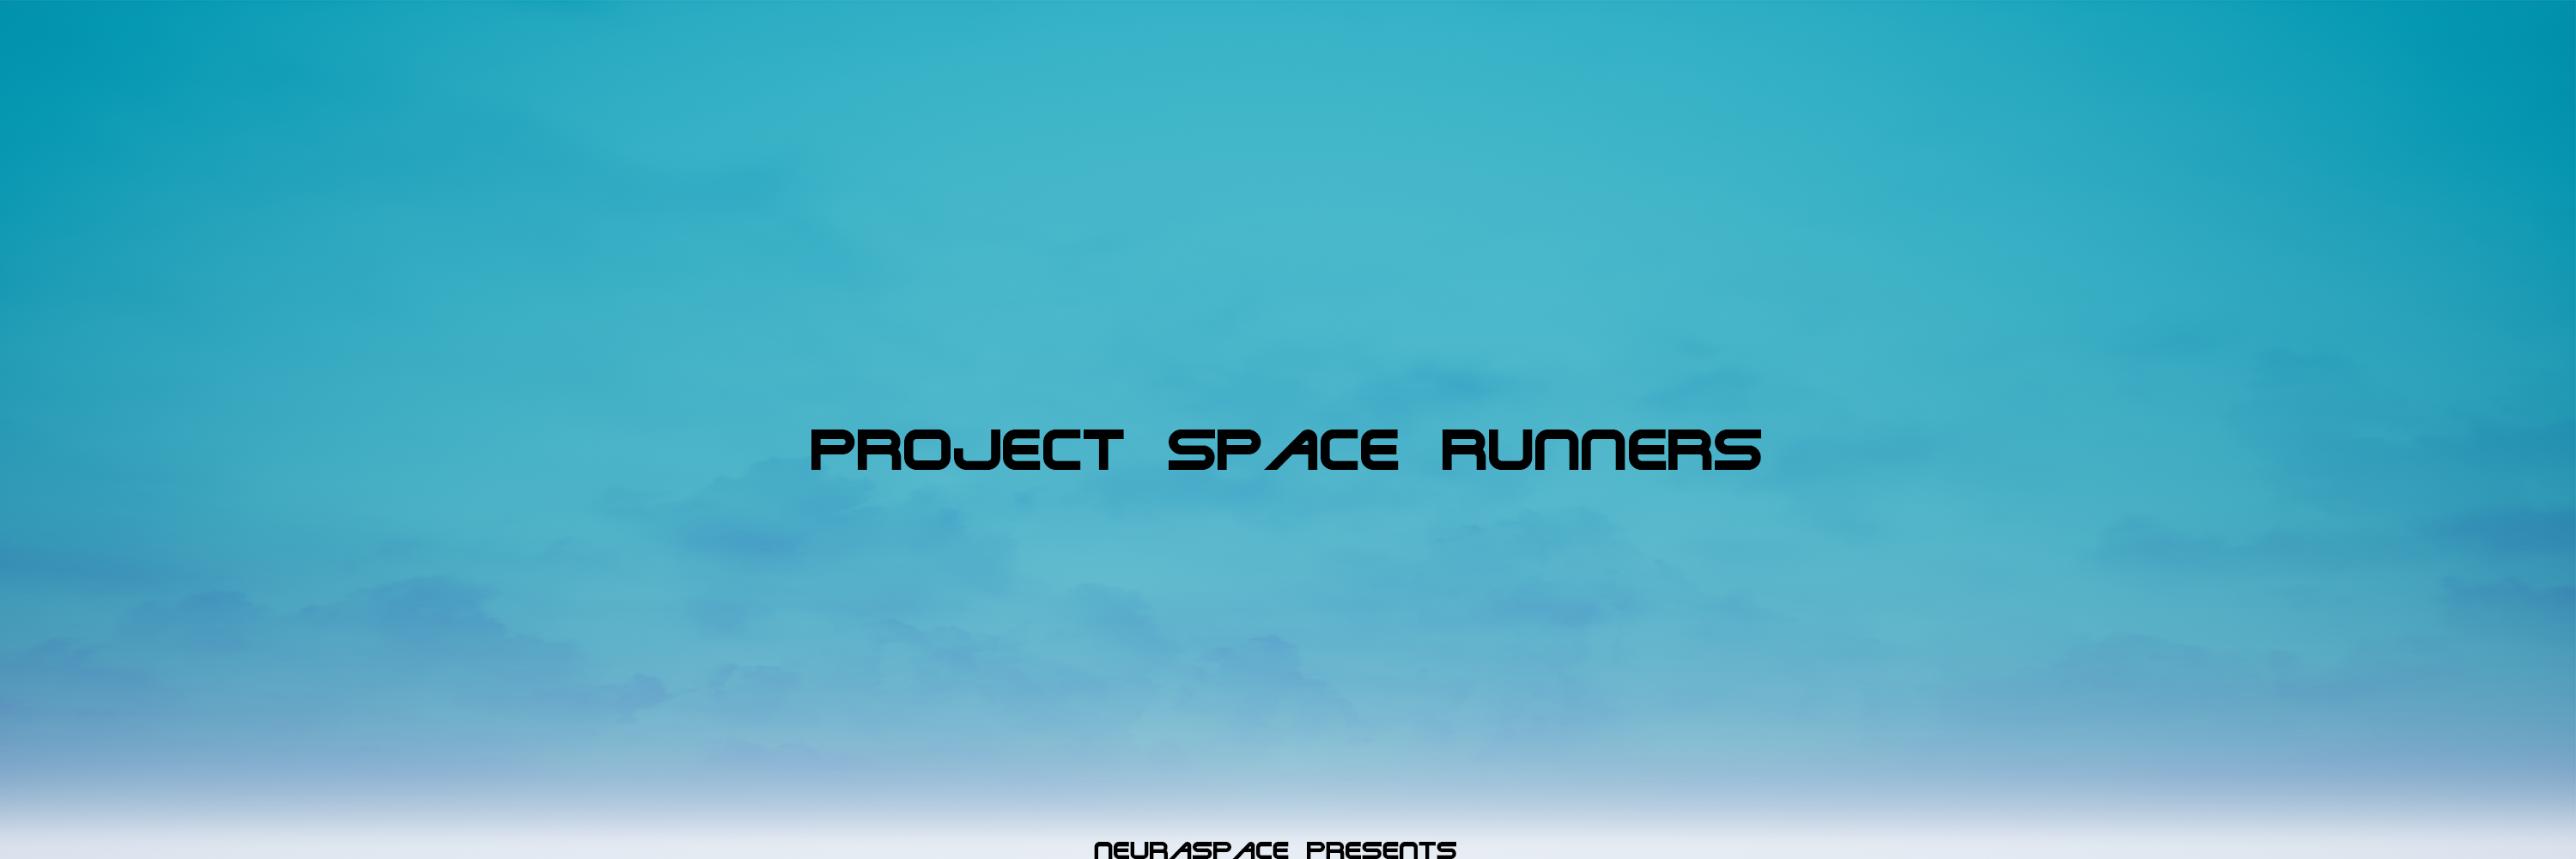 Project Space Runners